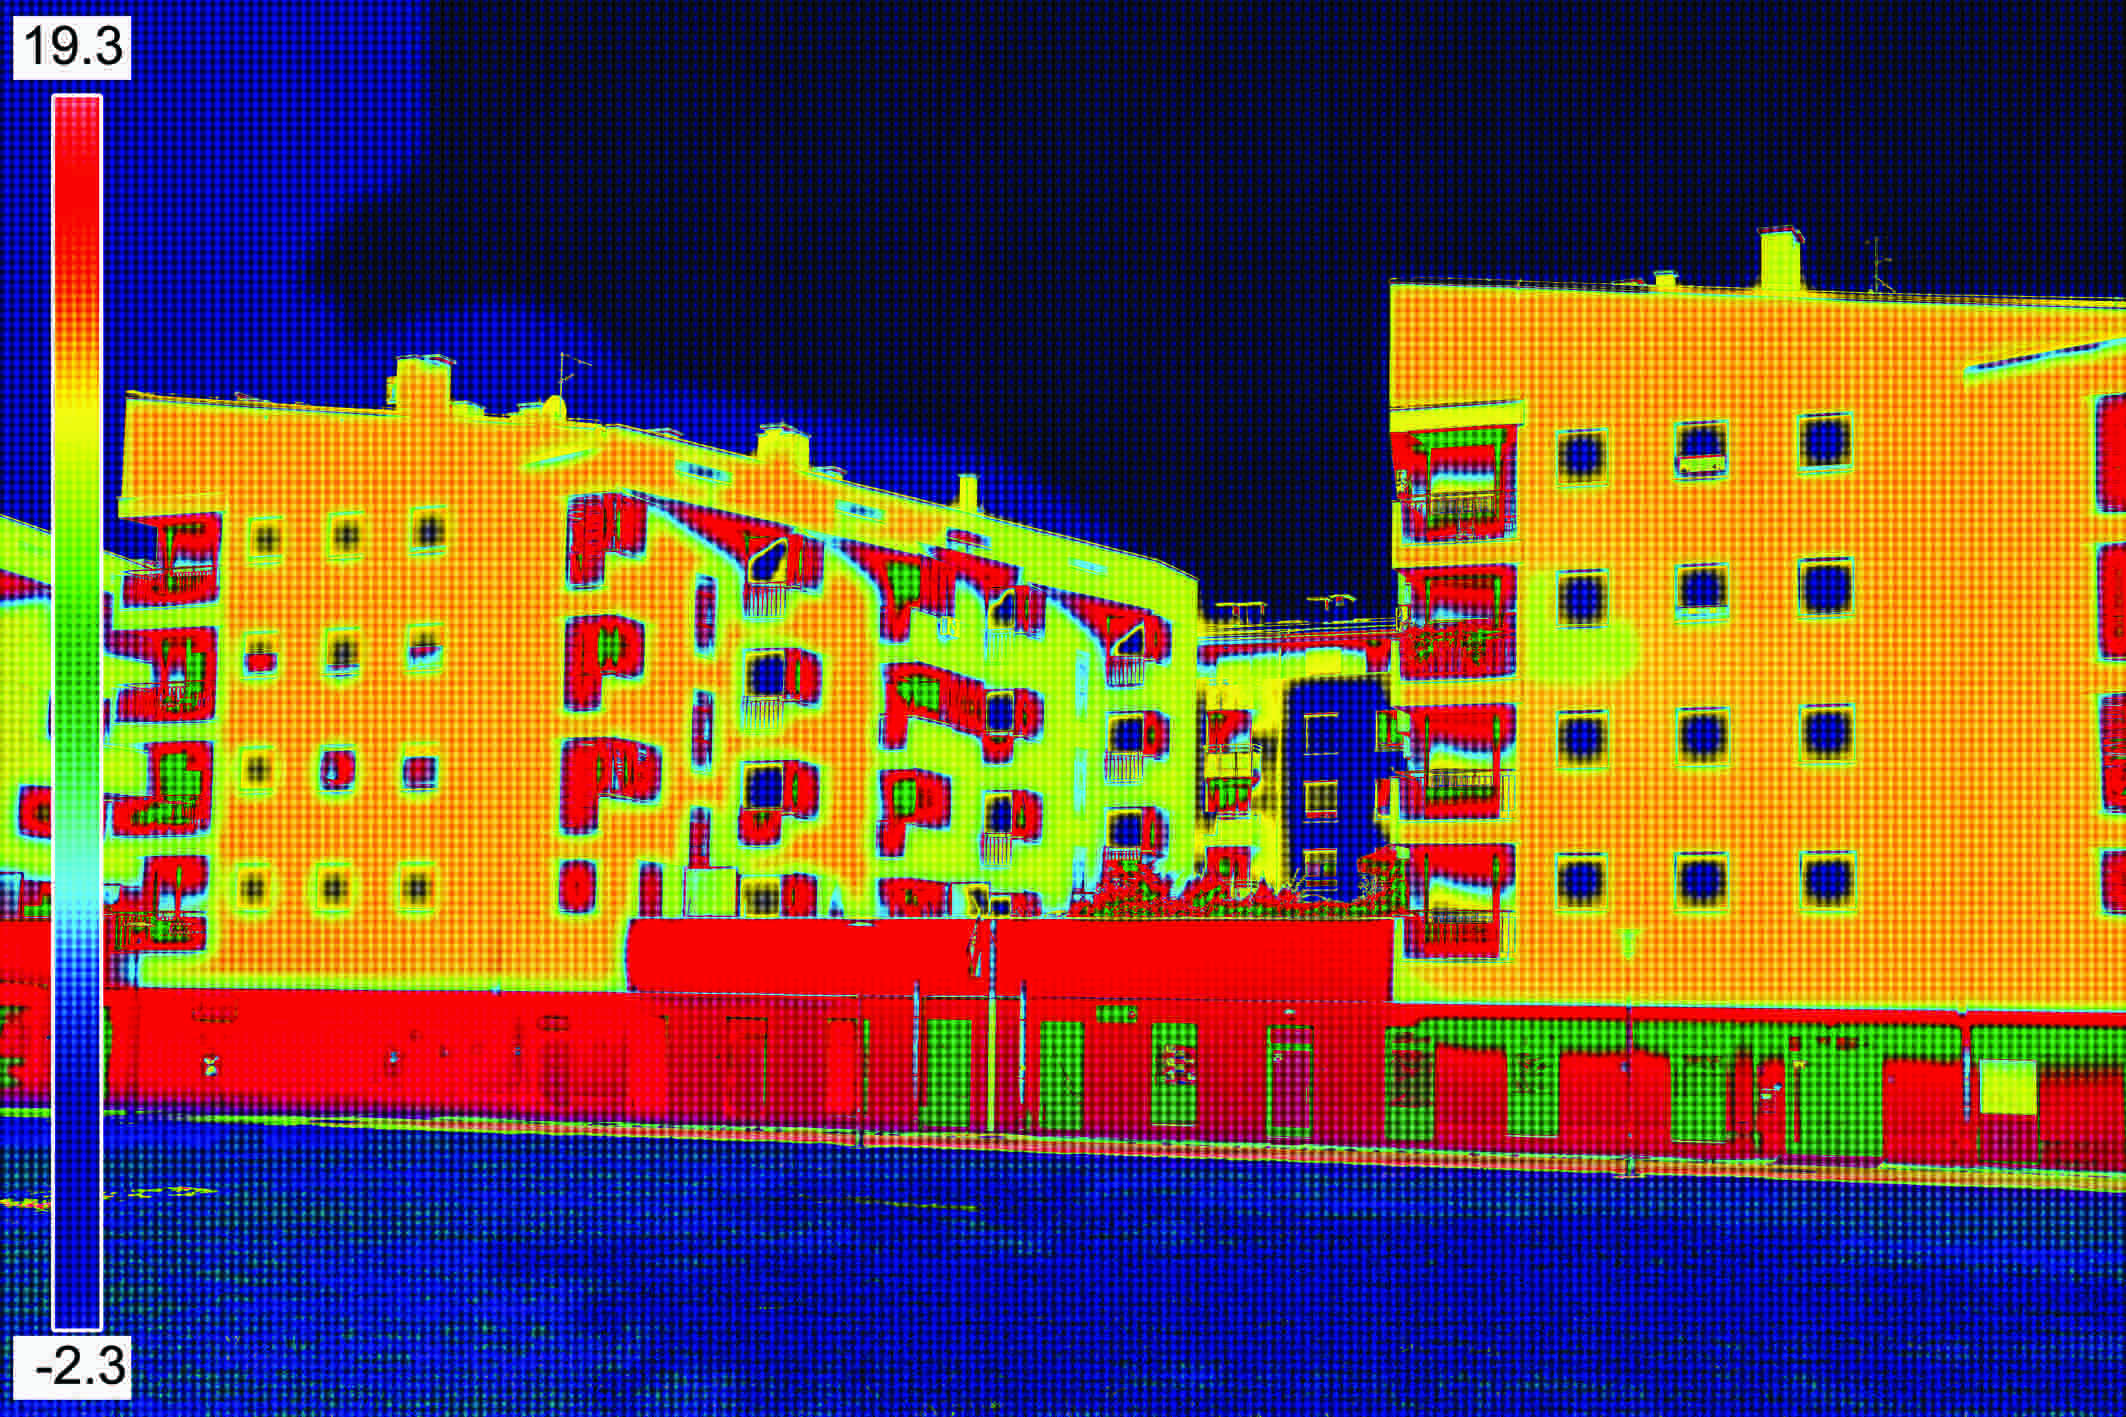 Infrared image lack of thermal insulation Innovate UK Building Performance Evaluation report CIBSE Journal April 2016